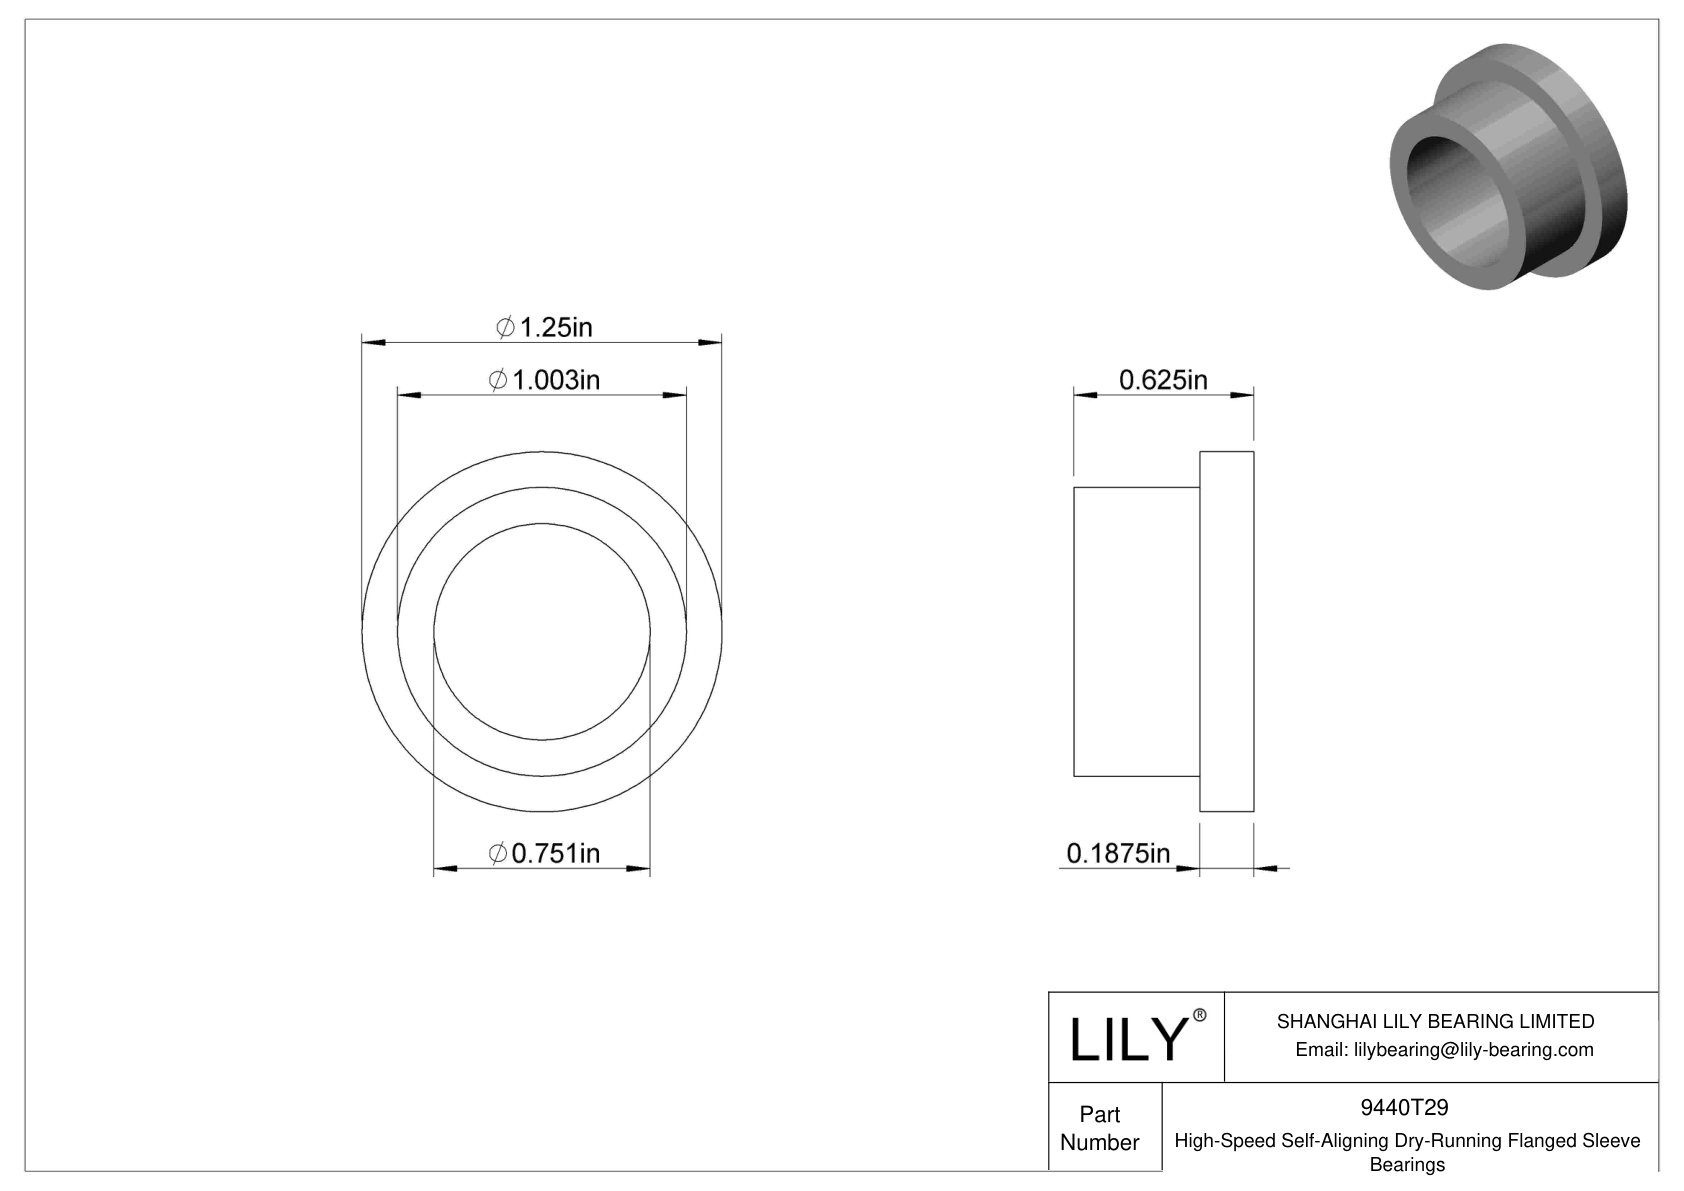 JEEATCJ High-Temperature Dry-Running Flanged Sleeve Bearings cad drawing